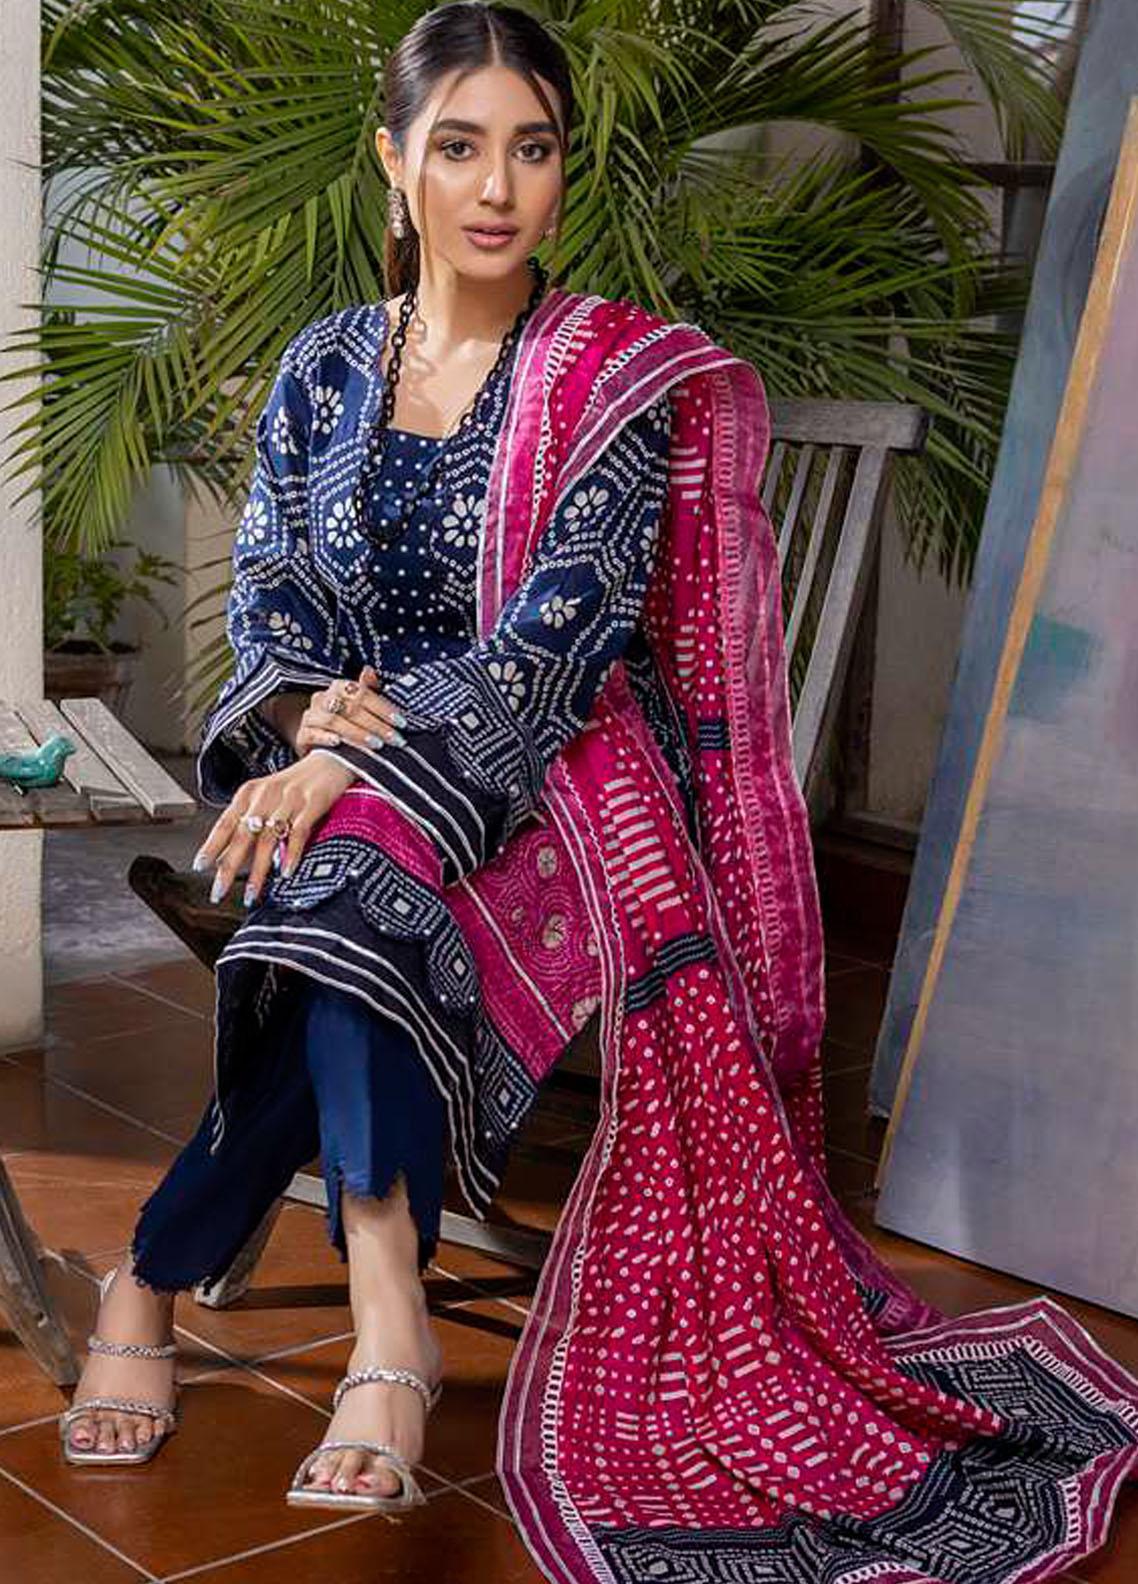 Monsoon Bahar By Al Zohaib Printed Lawn Suits Unstitched 3 Piece - 4A - Summer Collection